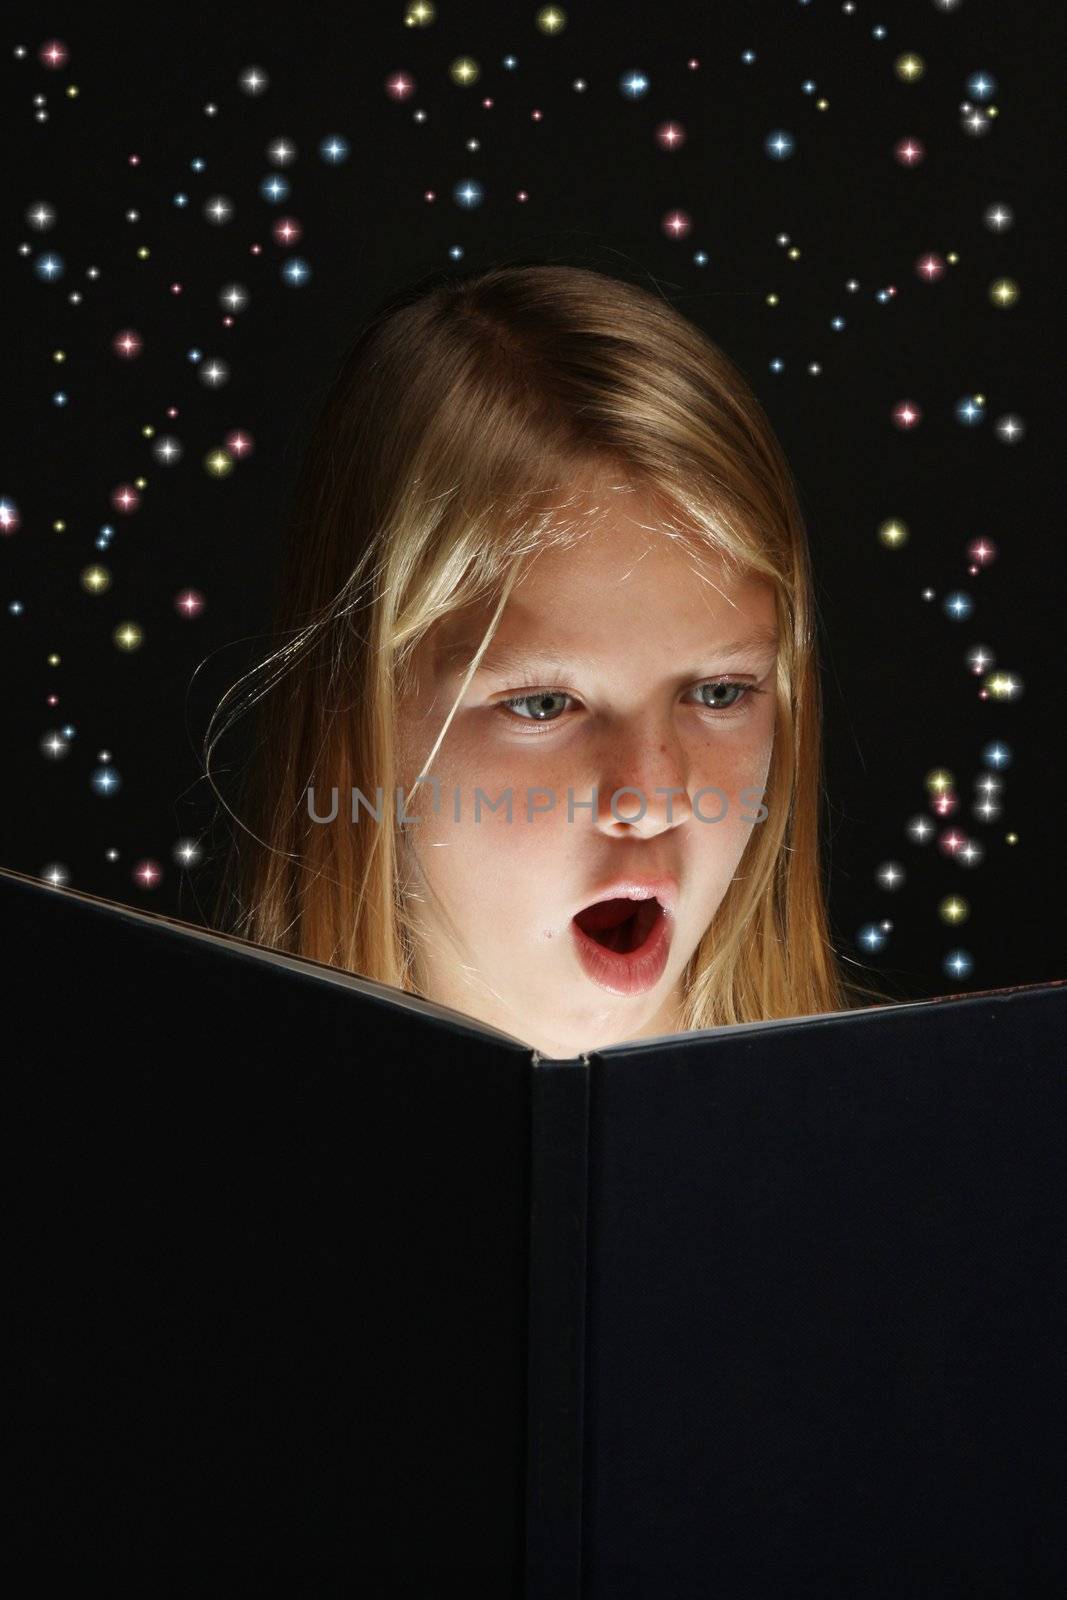 Young Girl Reading a Fantasy Book by fouroaks